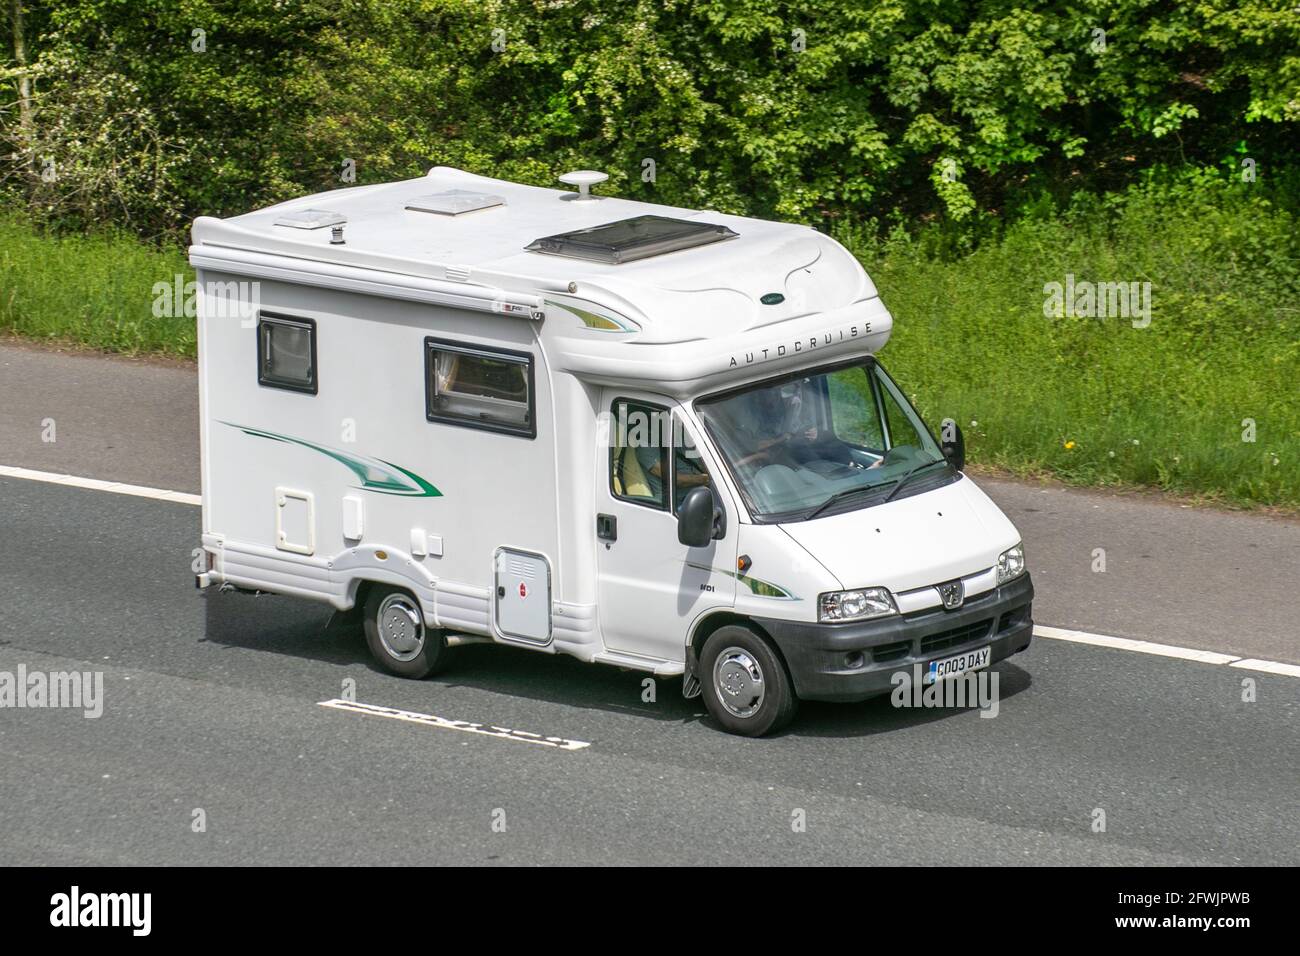 Peugeot AutoCruise 2200cc diesel van; Caravans and Motorhomes, campervans on Britain's roads, RV leisure vehicle, family holidays, caravanette vacations, Touring caravan holiday, van conversions, Vanagon autohome, life on the road,  auto-sleeper Stock Photo